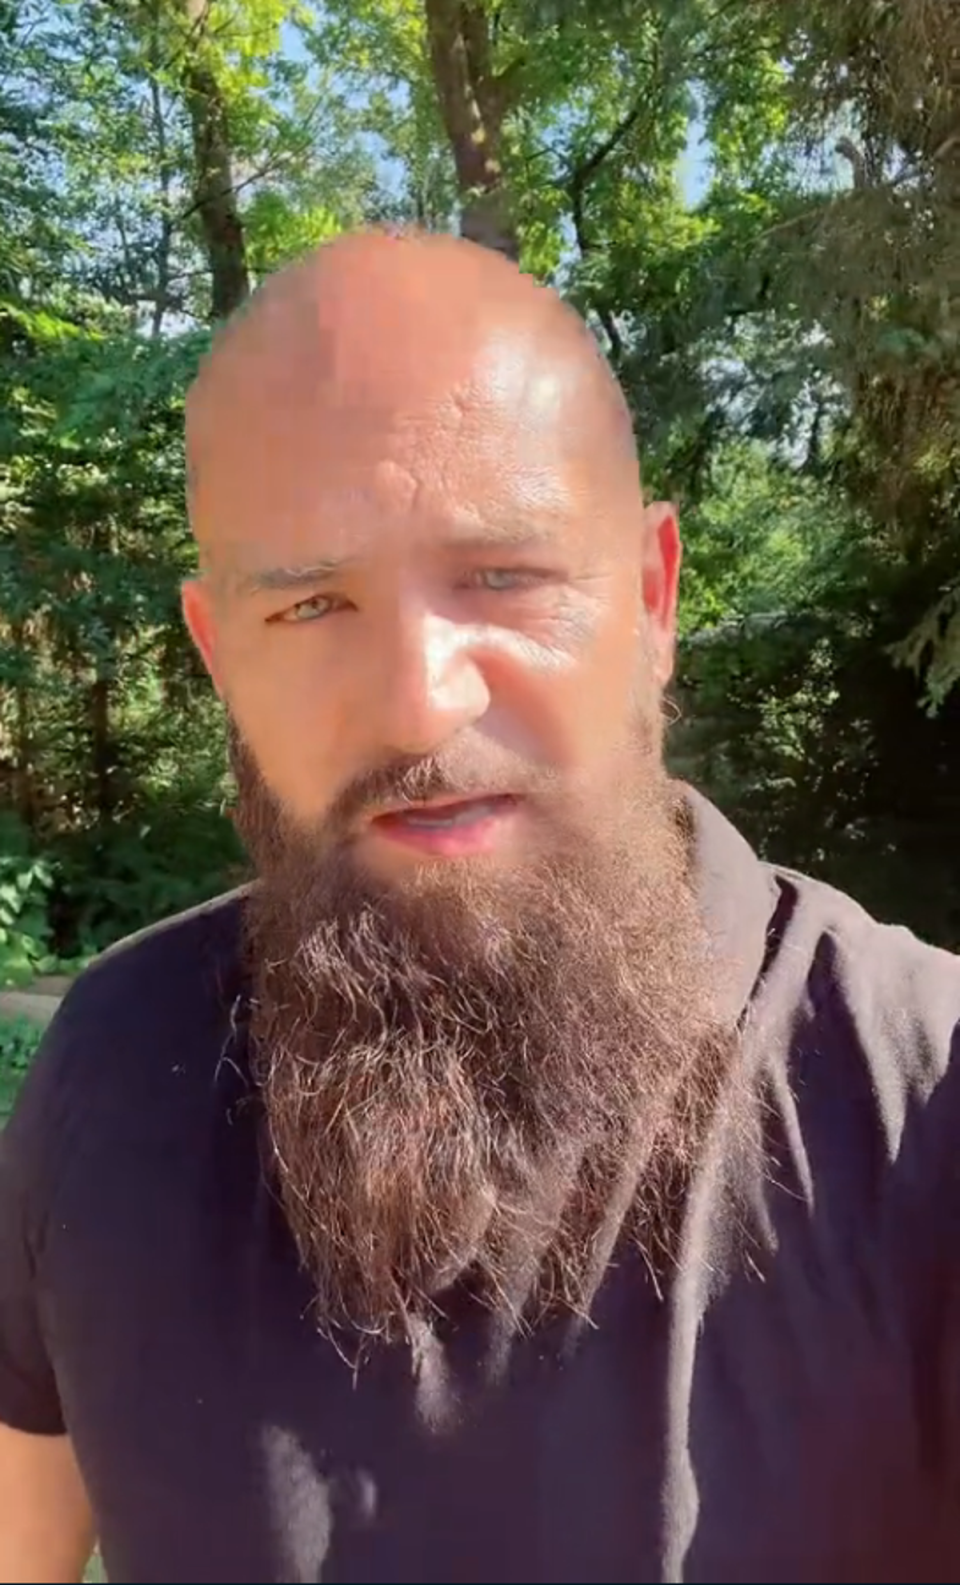 TikToker David Baerten explained in a follow-up video why he decided to carry out the prank (TikTok/ragnar_le_fou)